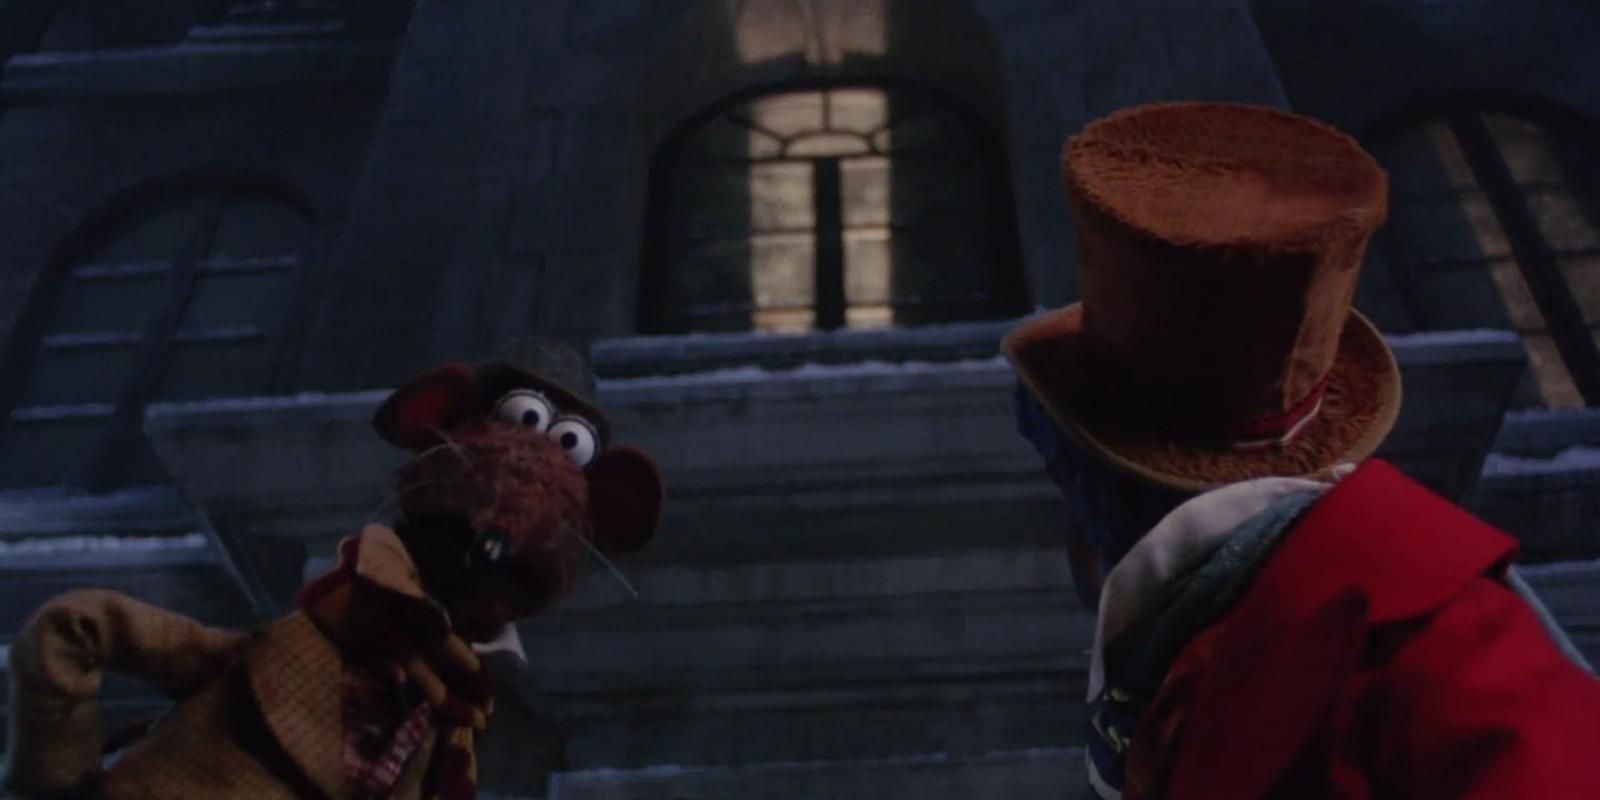 Rizzo the Rat looks at the camera outside Scrooge's home in The Muppet Christmas Carol